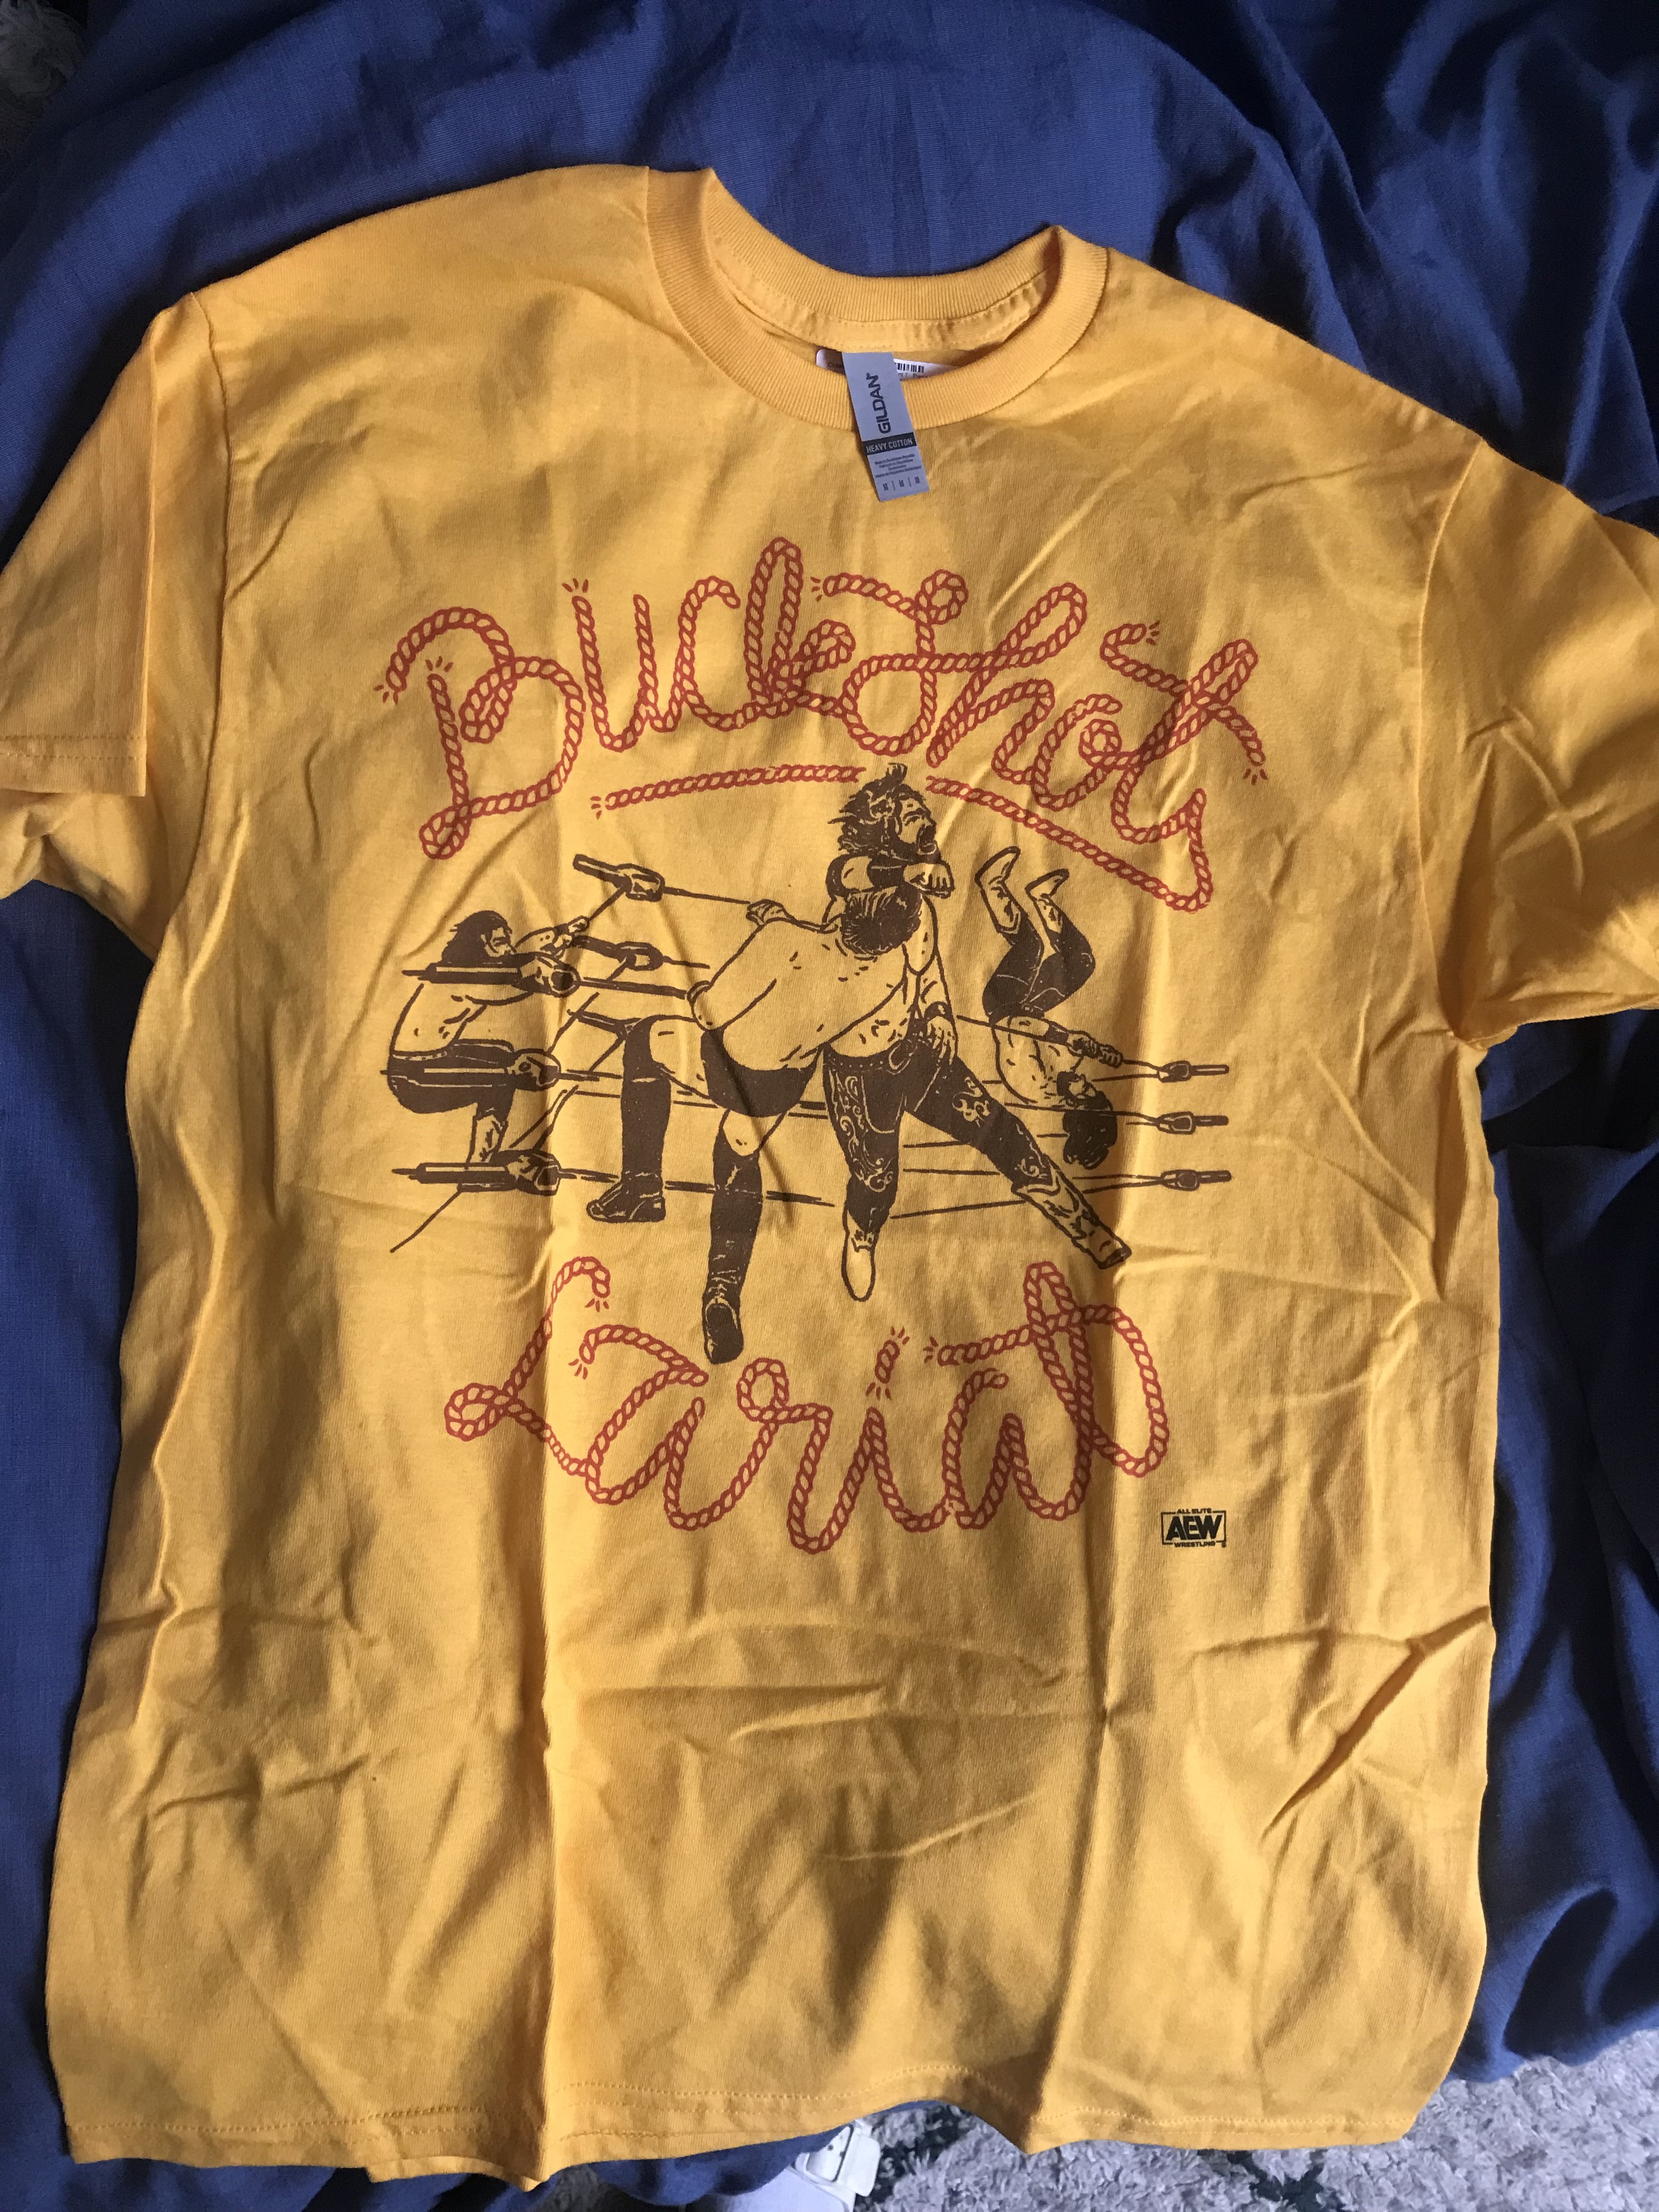 A yellow tshirt with a one-colour illustration in black of a pro wrestler throwing a lariat, and with text surrounding it in red with a stylized rope effect that says Buckshot Lariat.